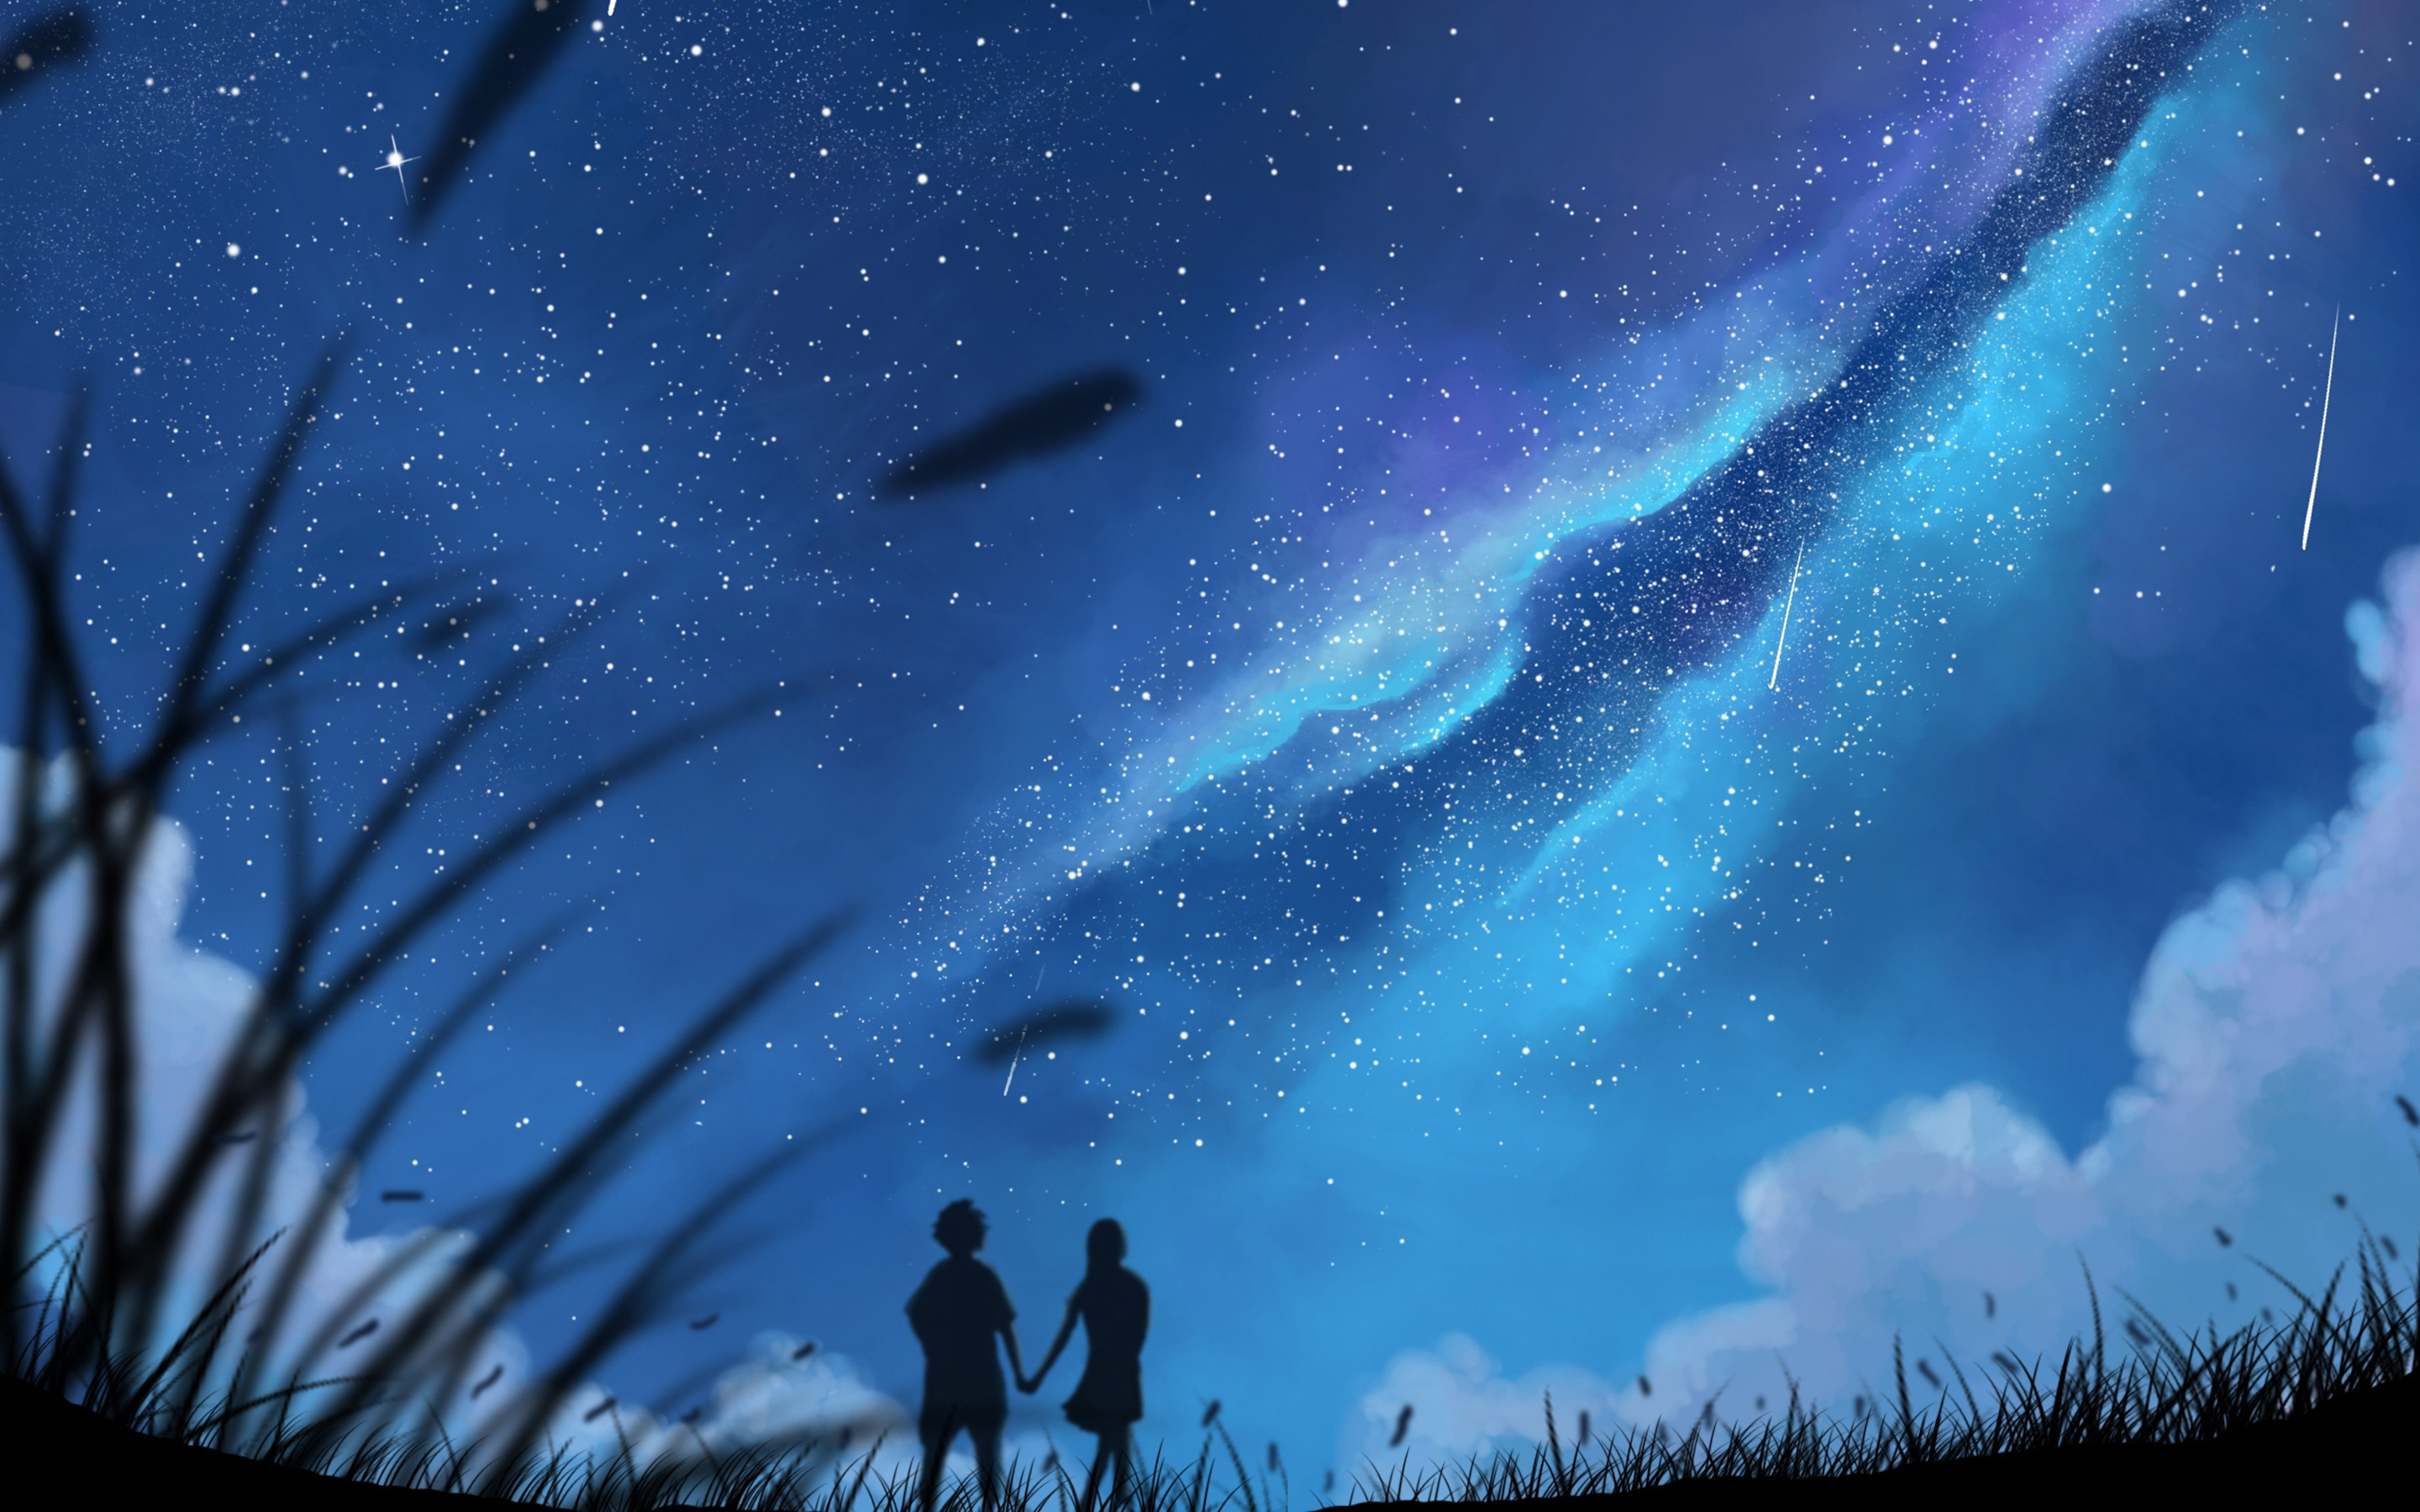 Couple, love, holding hands, outdoor, night, silhouette, 2880x1800 wallpaper